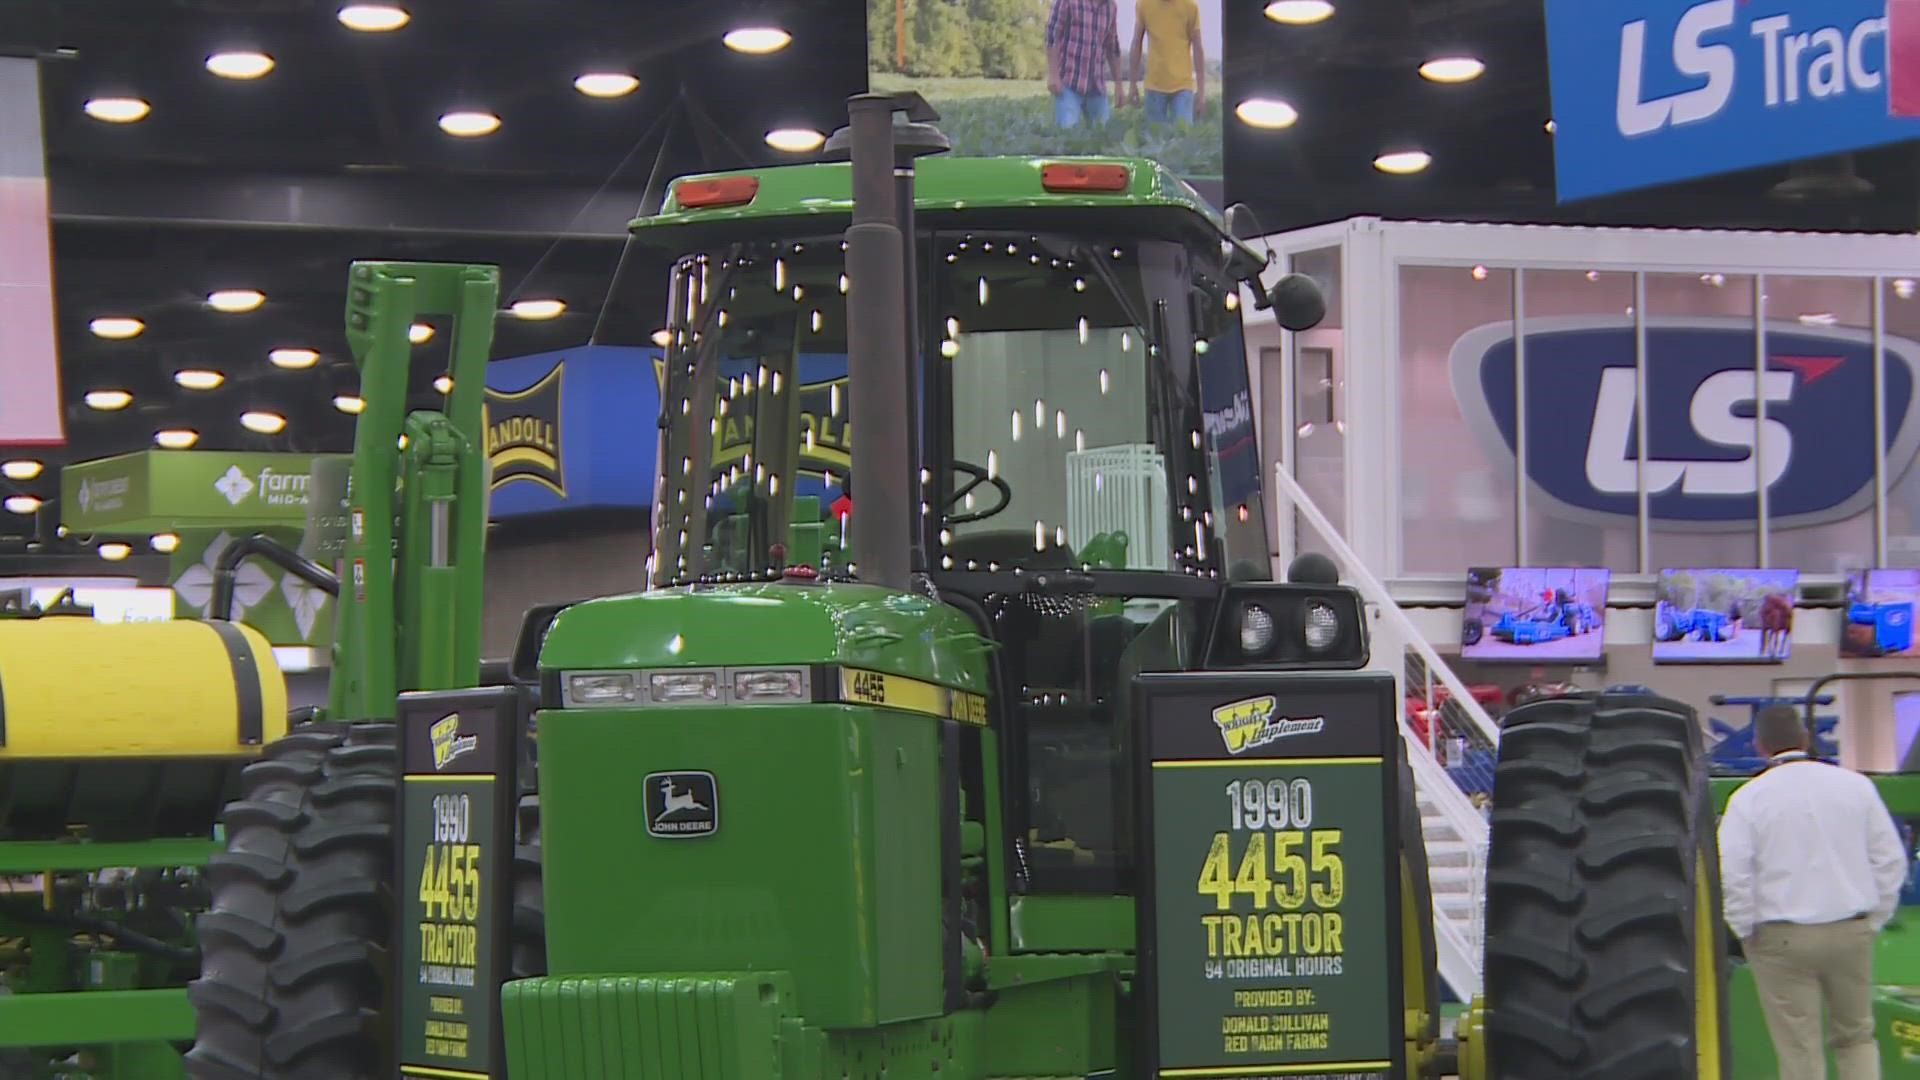 Each year, more than 250,000 people flock to the Kentucky Expo Center to see the newest technology a farmer can buy.